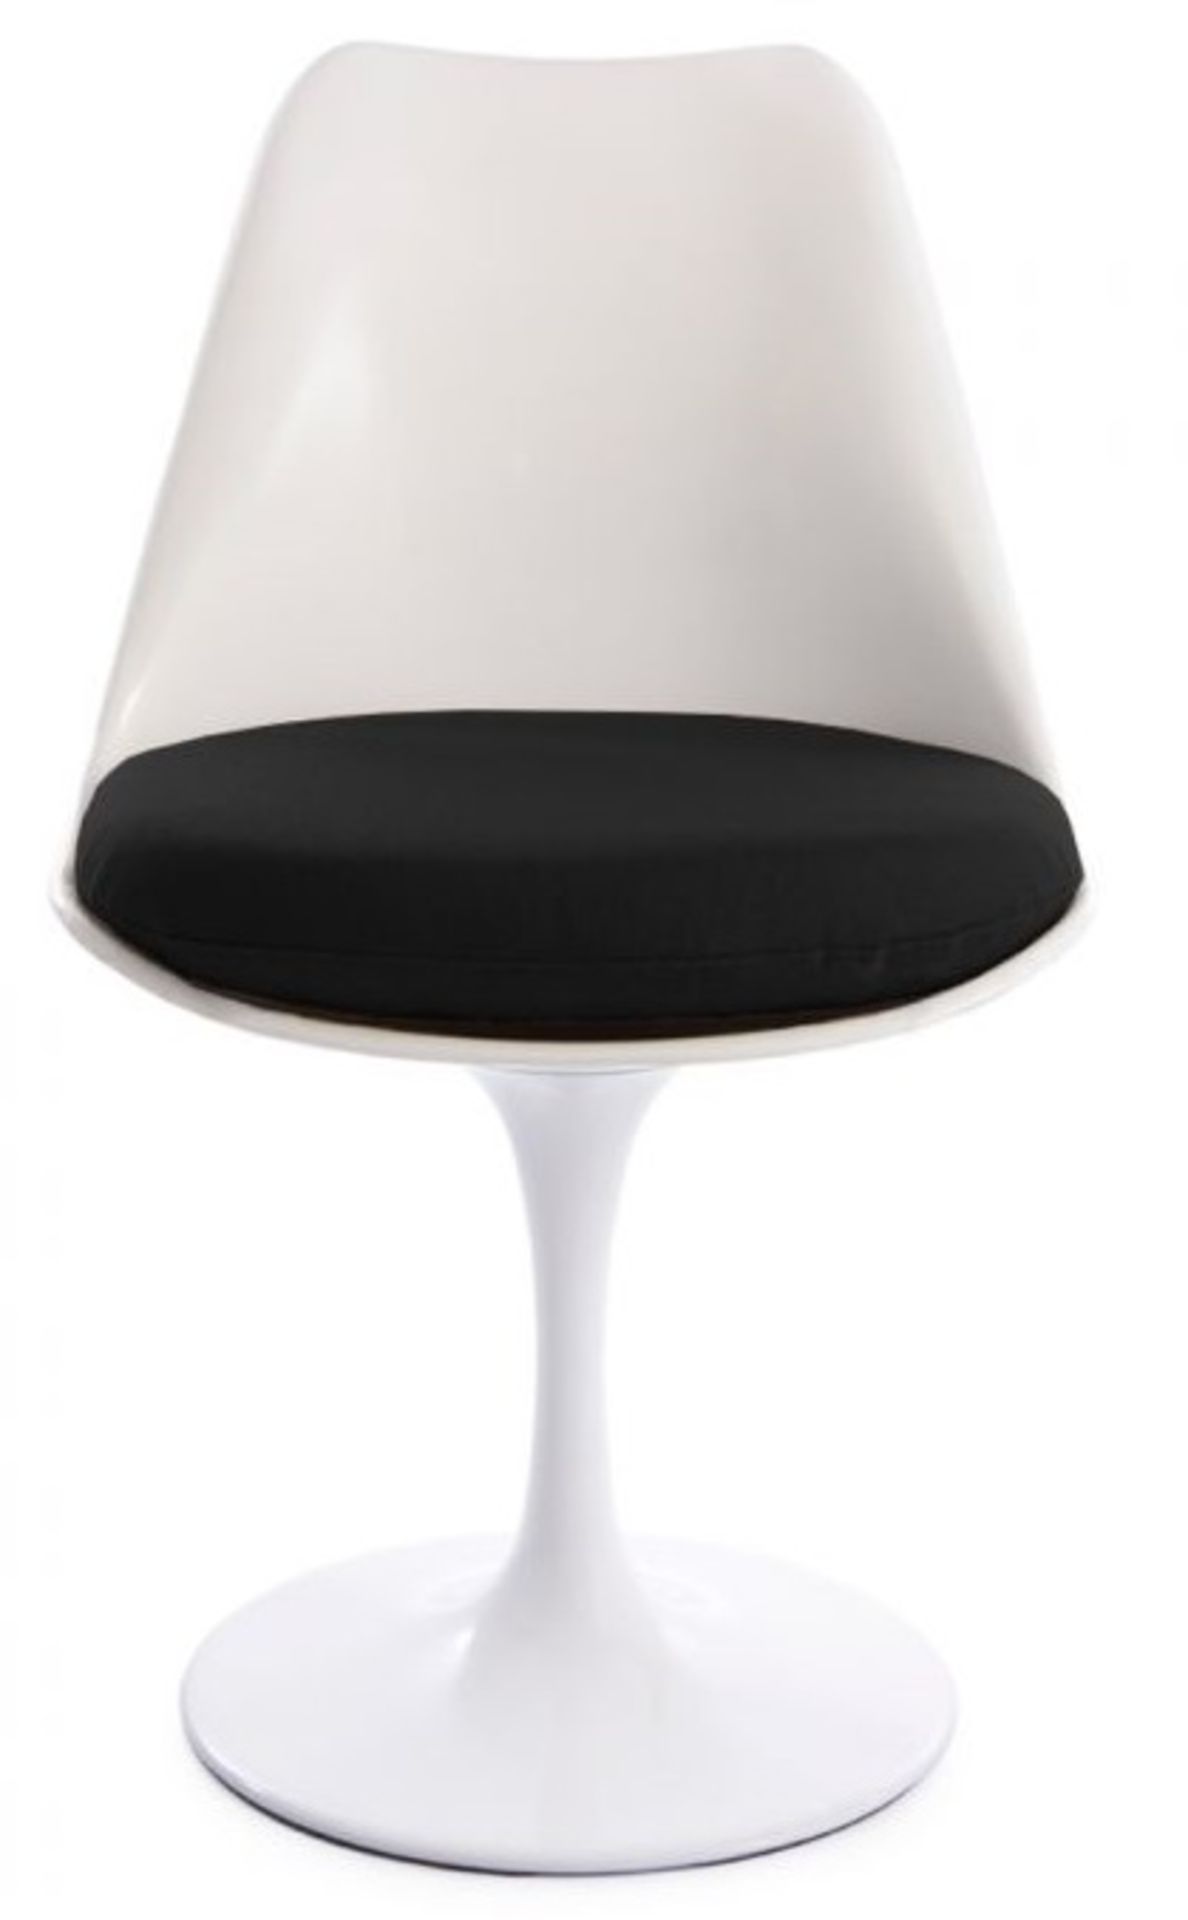 1 x Eero Saarinen Inspired Tulip Armchair In White With Black Faux Leather Cushion - Brand New Boxed - Image 2 of 4